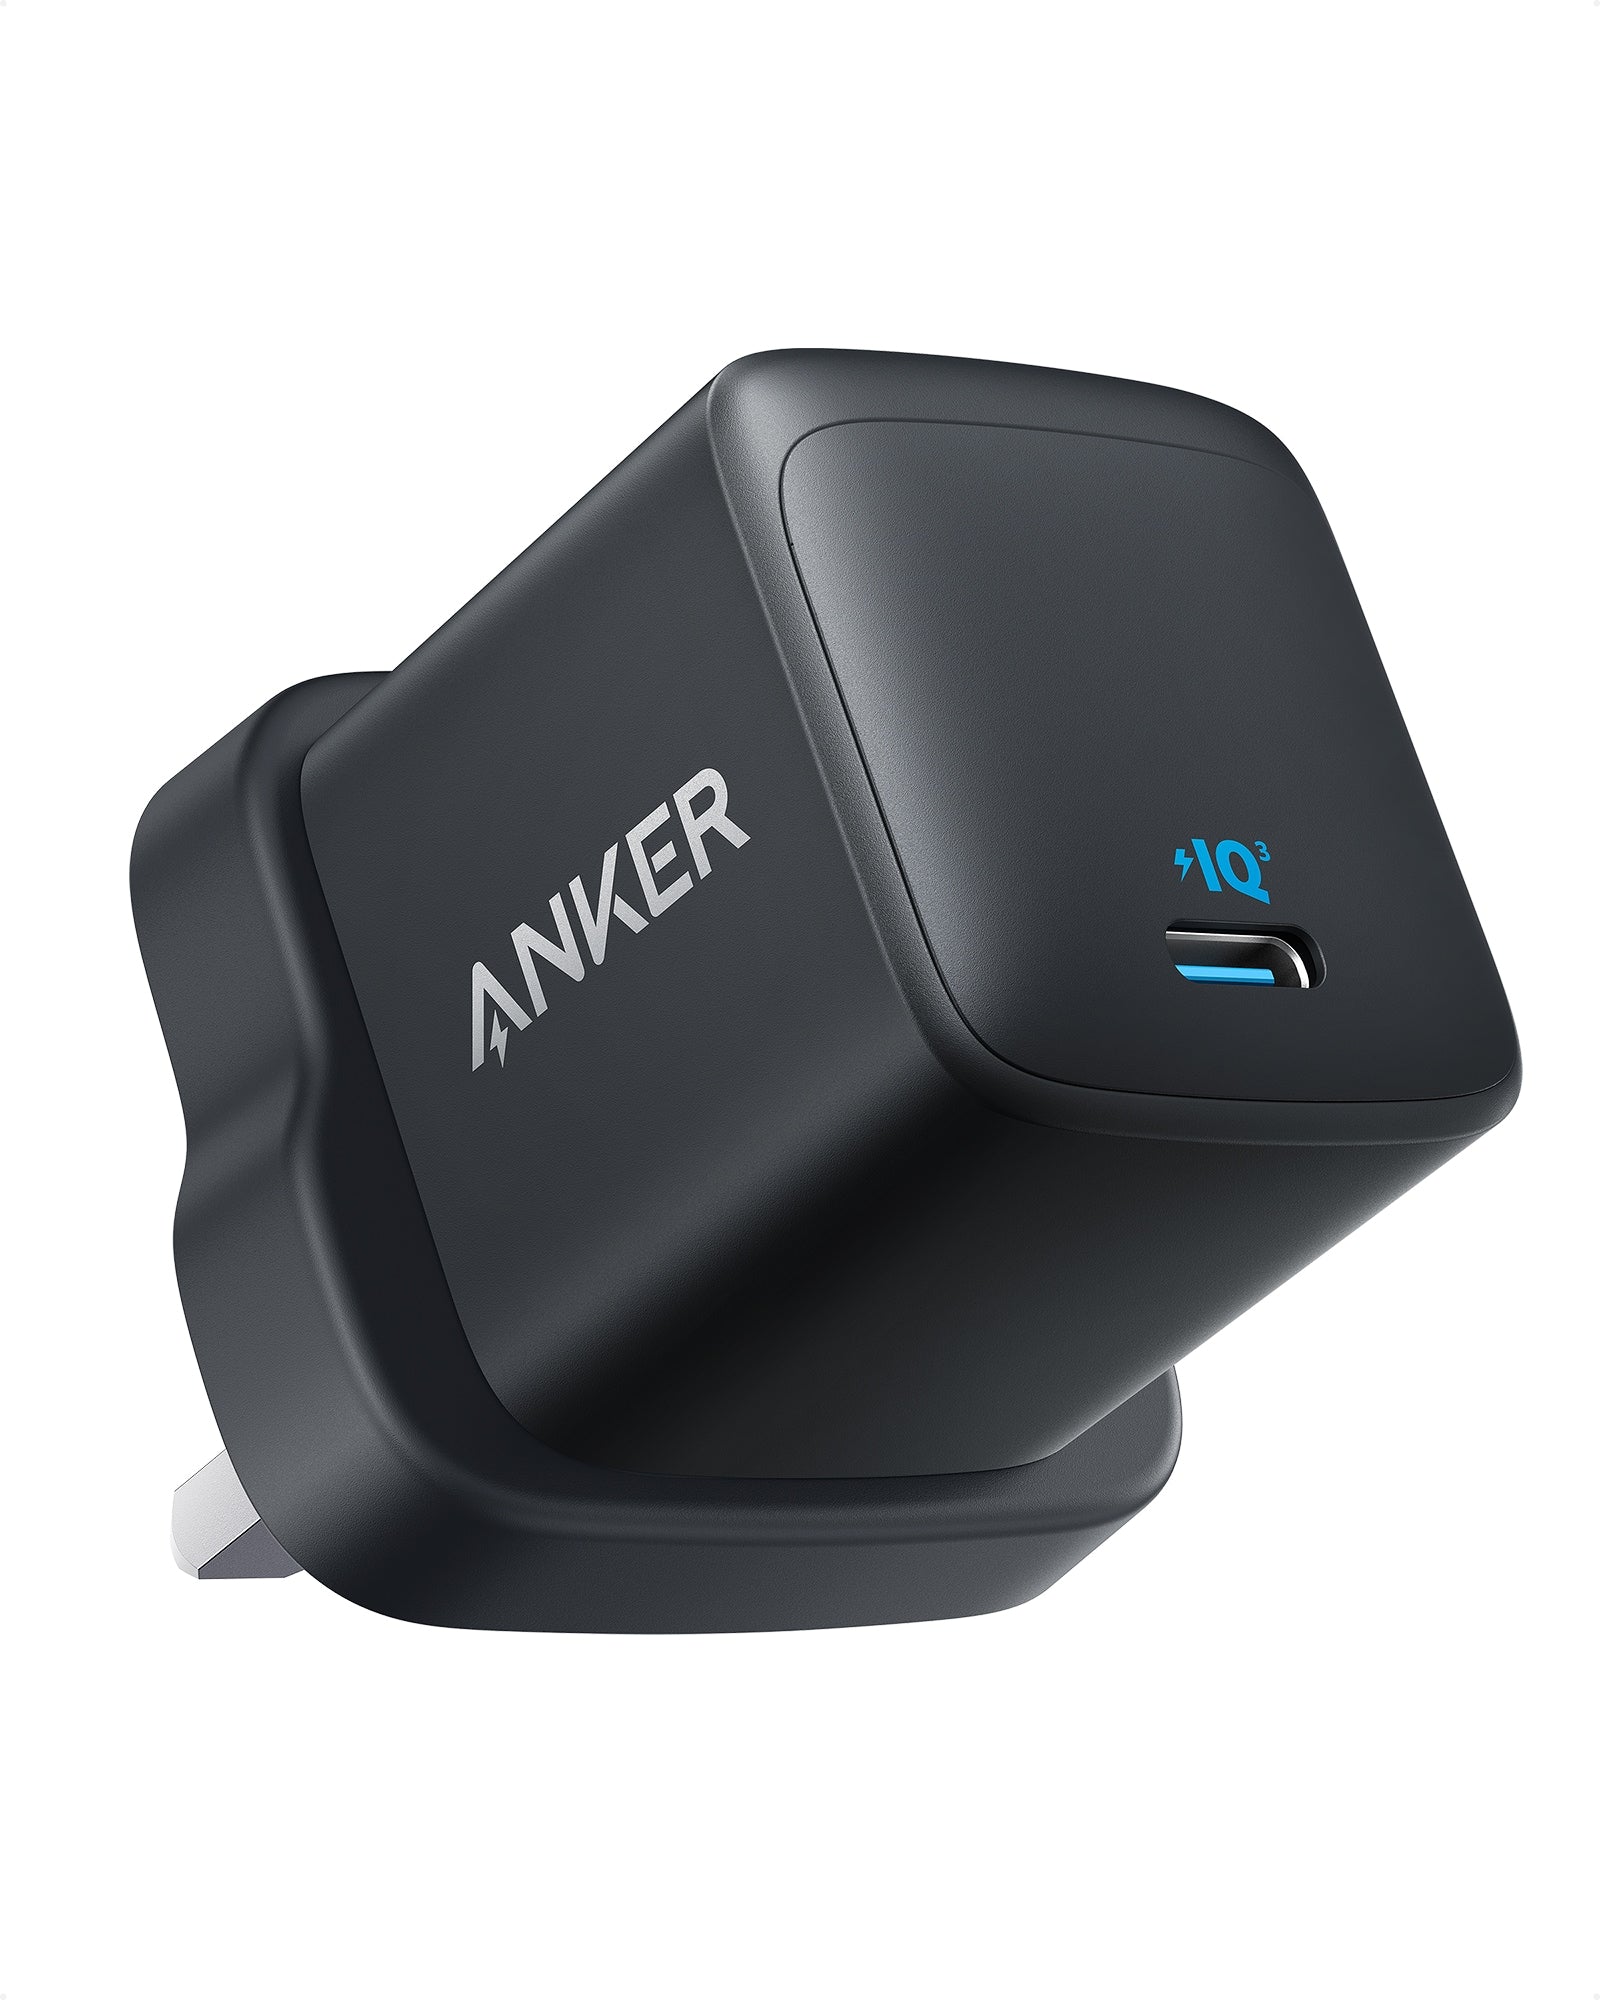 Anker 313 Charger (Ace, 45W) Black